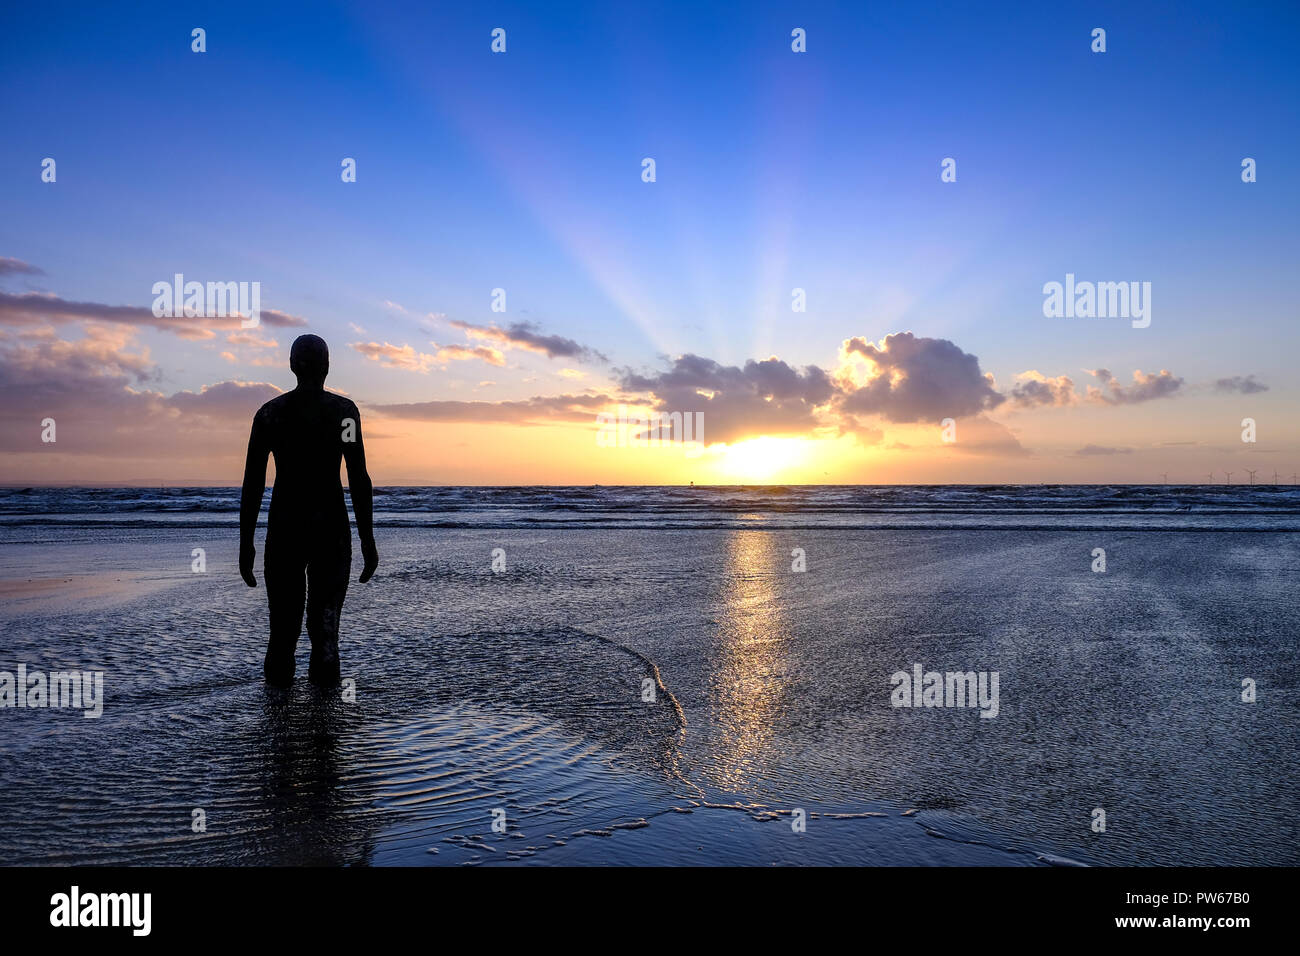 'Another Place' by Antony Gormley Iron Man statues on Crosby Beach Liverpool Merseyside Stock Photo